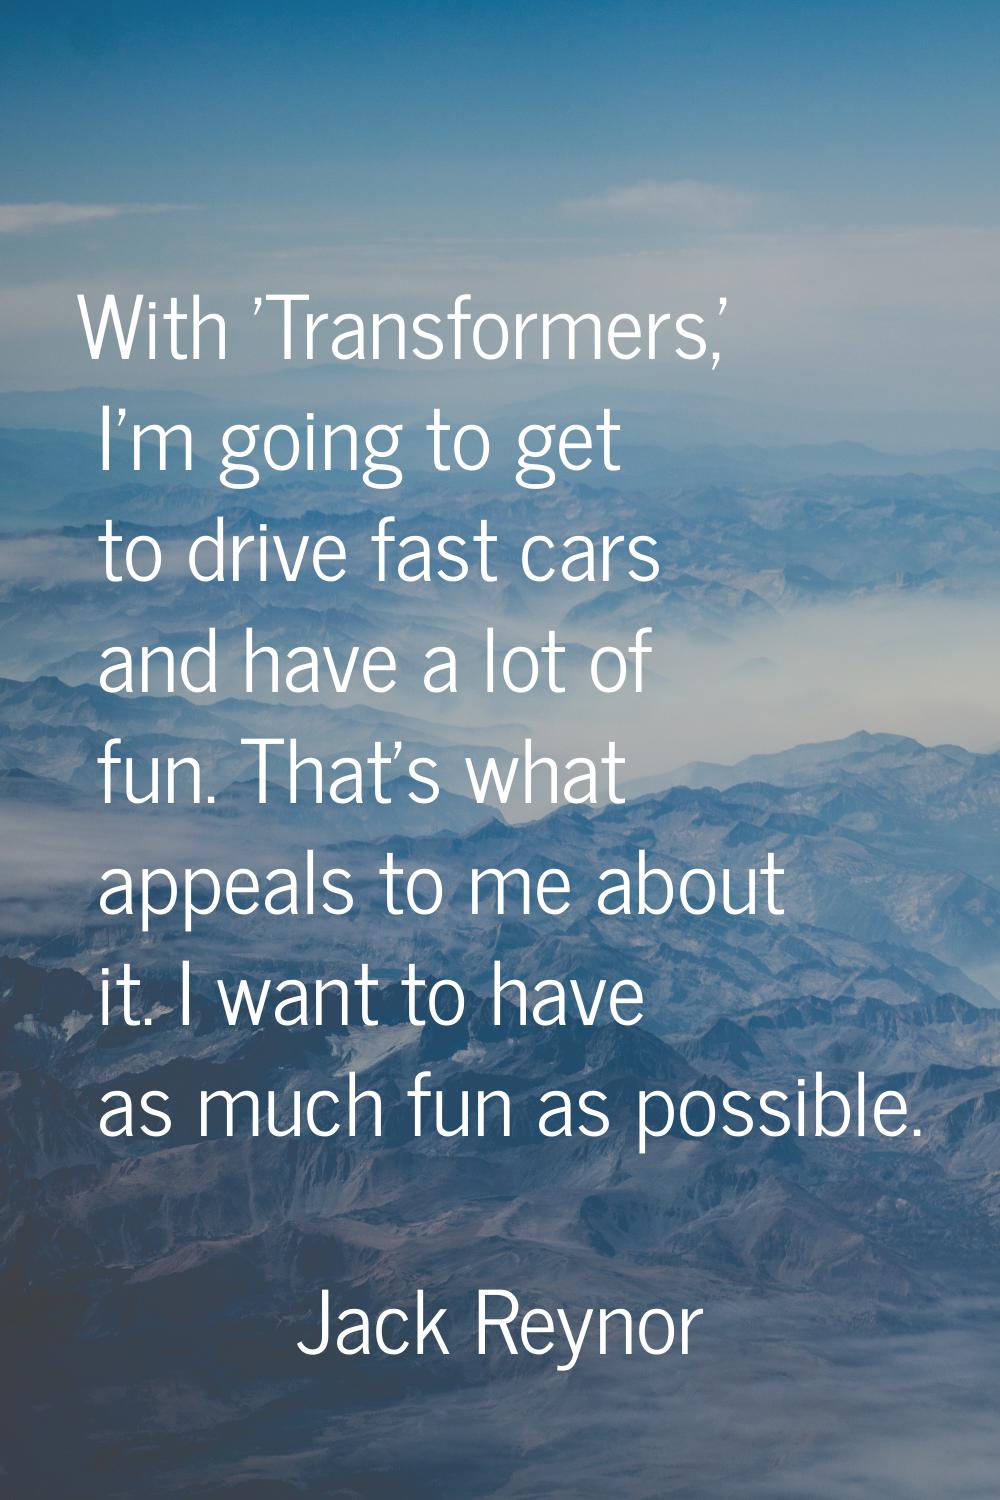 With 'Transformers,' I'm going to get to drive fast cars and have a lot of fun. That's what appeals